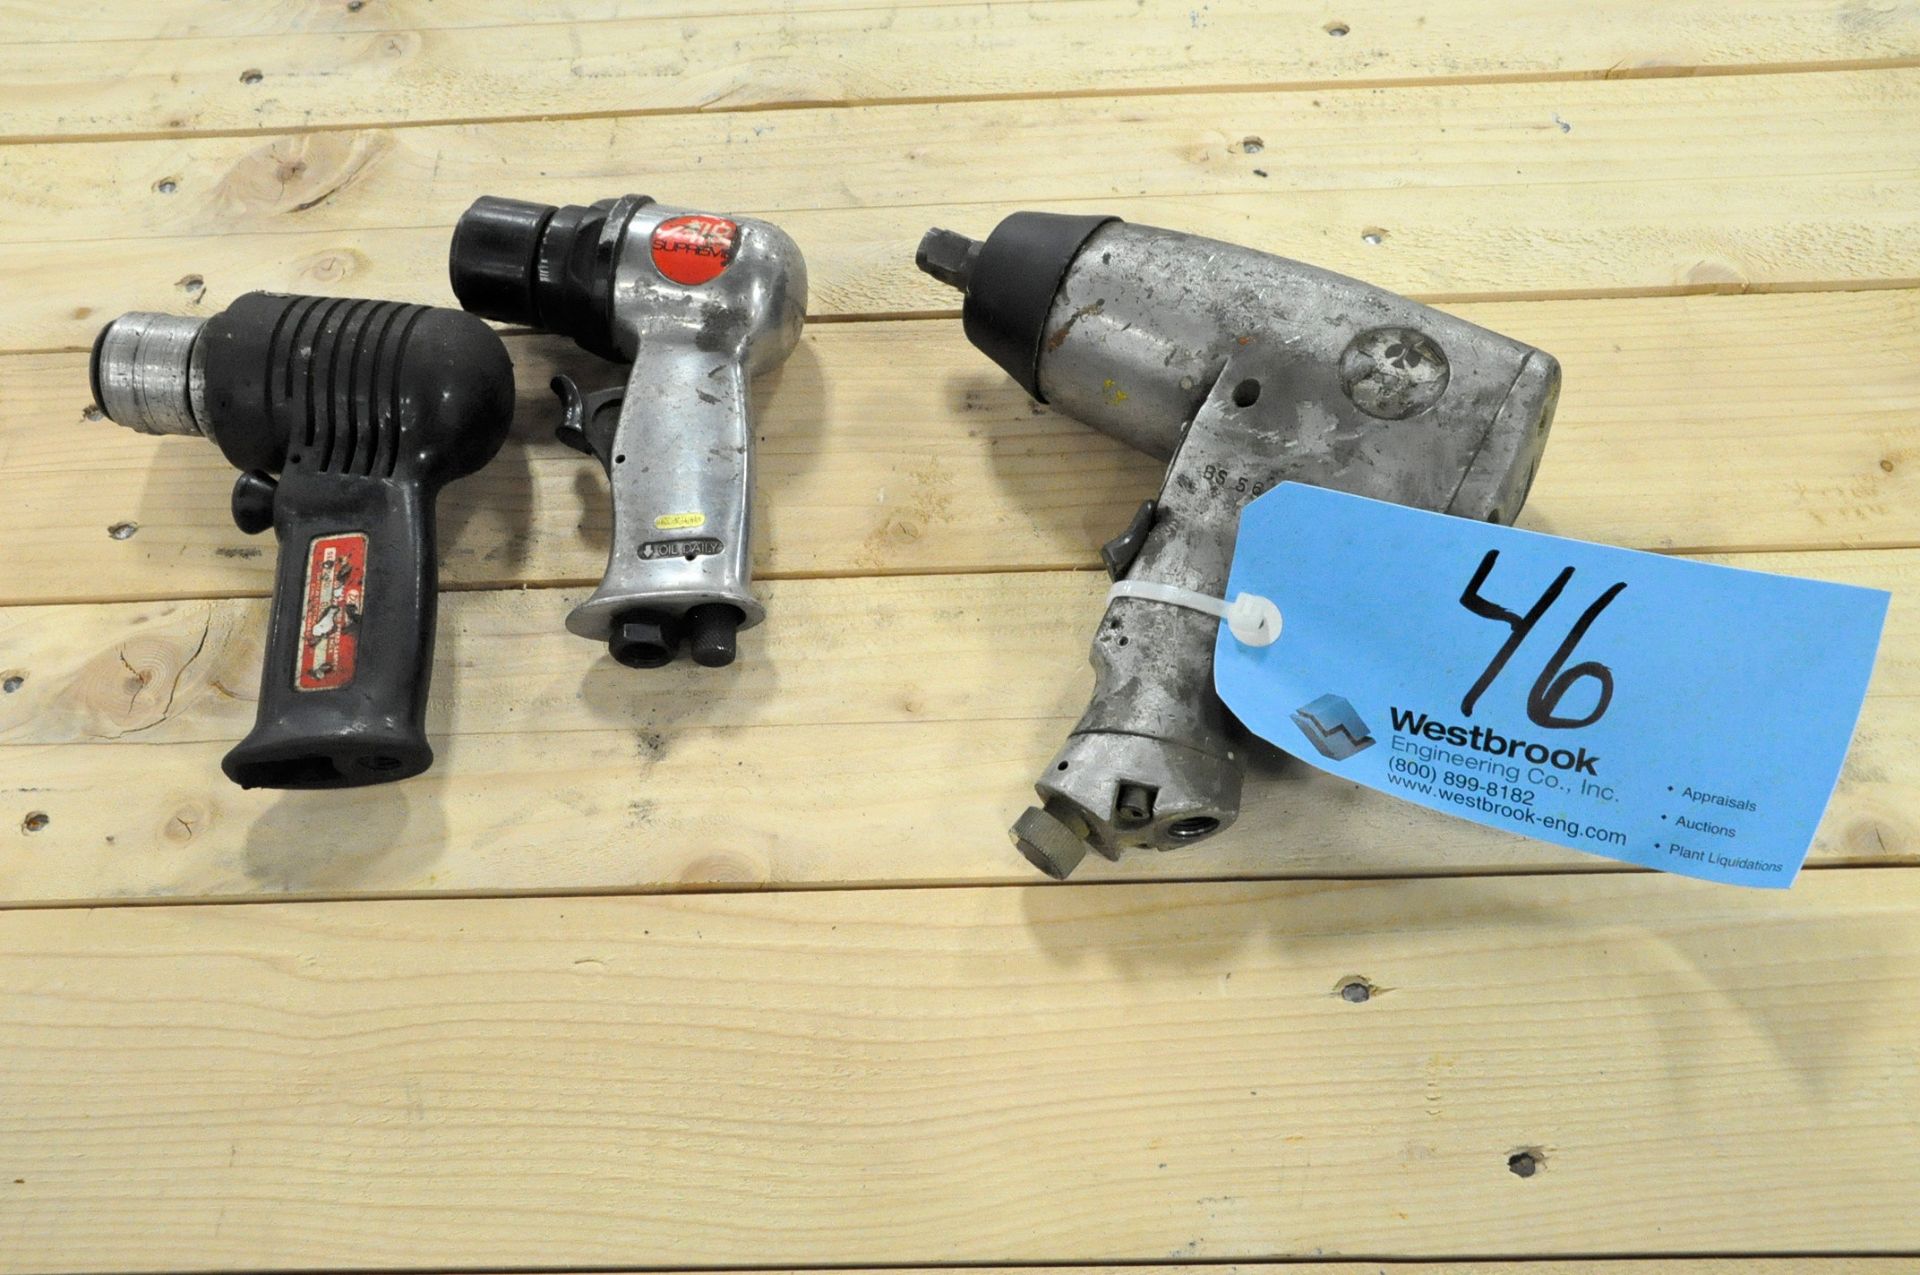 ROCKWELL Model 32362 1/2" Pneumatic Impact Wrench with (2) Pneumatic Sanders